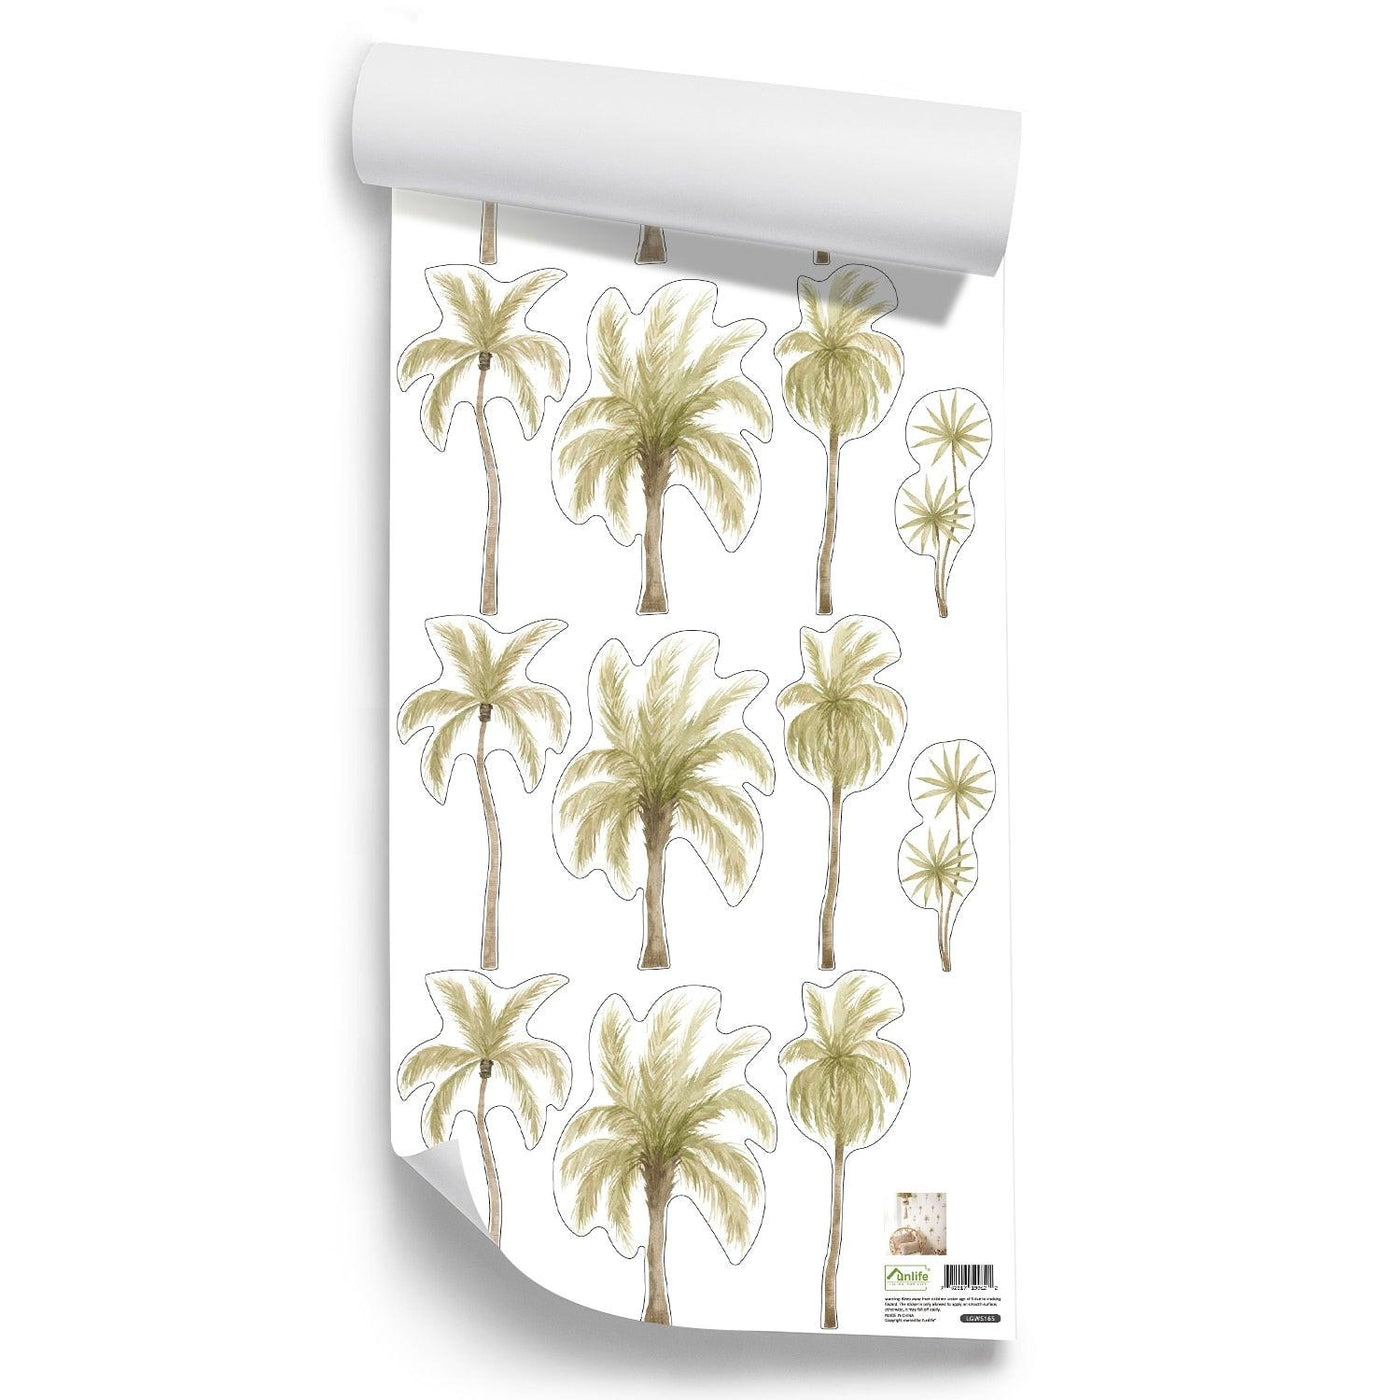 Boho Wall Decal Stickers - Palm Trees - Parker and Olive